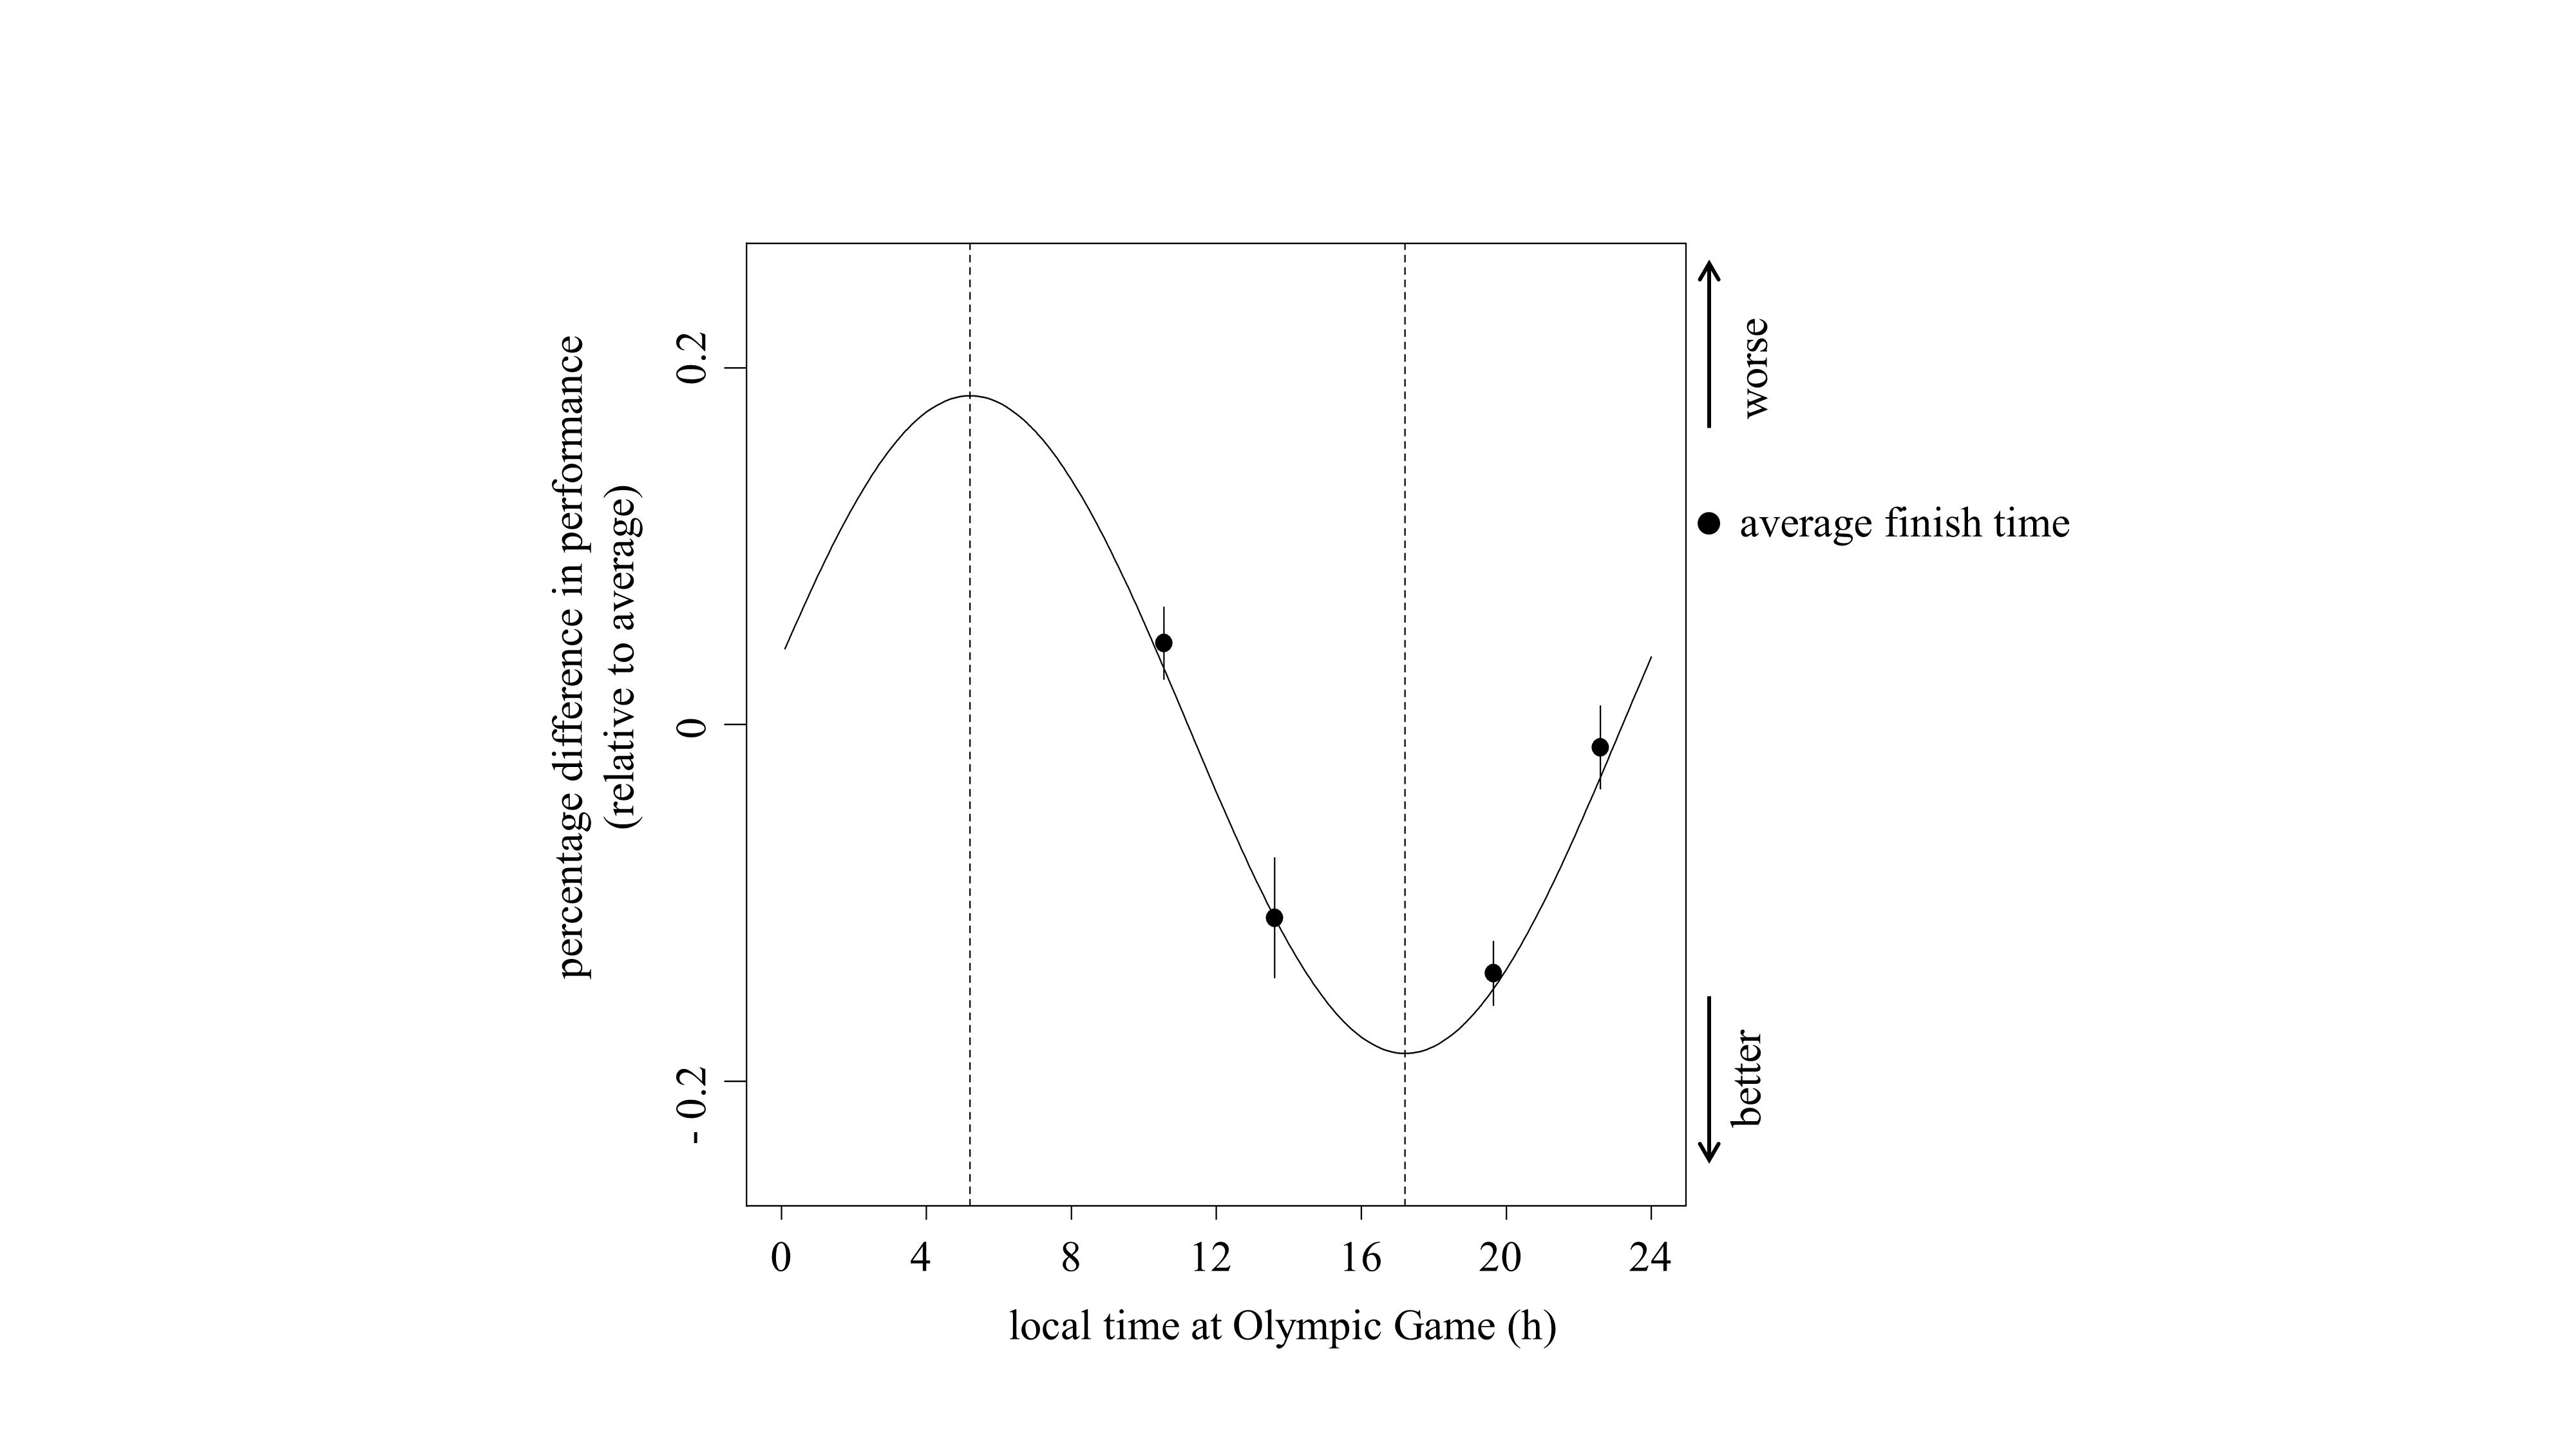 Olympic swim performance depends on time-of-day. Residual variation of individually normalized data of heats, semi-finals and finals (corrected for intercept, type of race, Olympic venue, and individual differences, as quantified by a linear mixed model) was fitted by a 24-h period sine function and plotted against local time at the Olympic venue location (h). Data represent mean ±SEM. Black dots indicate average finish times in 3-h bins. A sine fit (period=24 h, black curve) describes variation in swim performance over the day. It indicates worst performance in the early morning and best performance in the late afternoon (dotted lines).